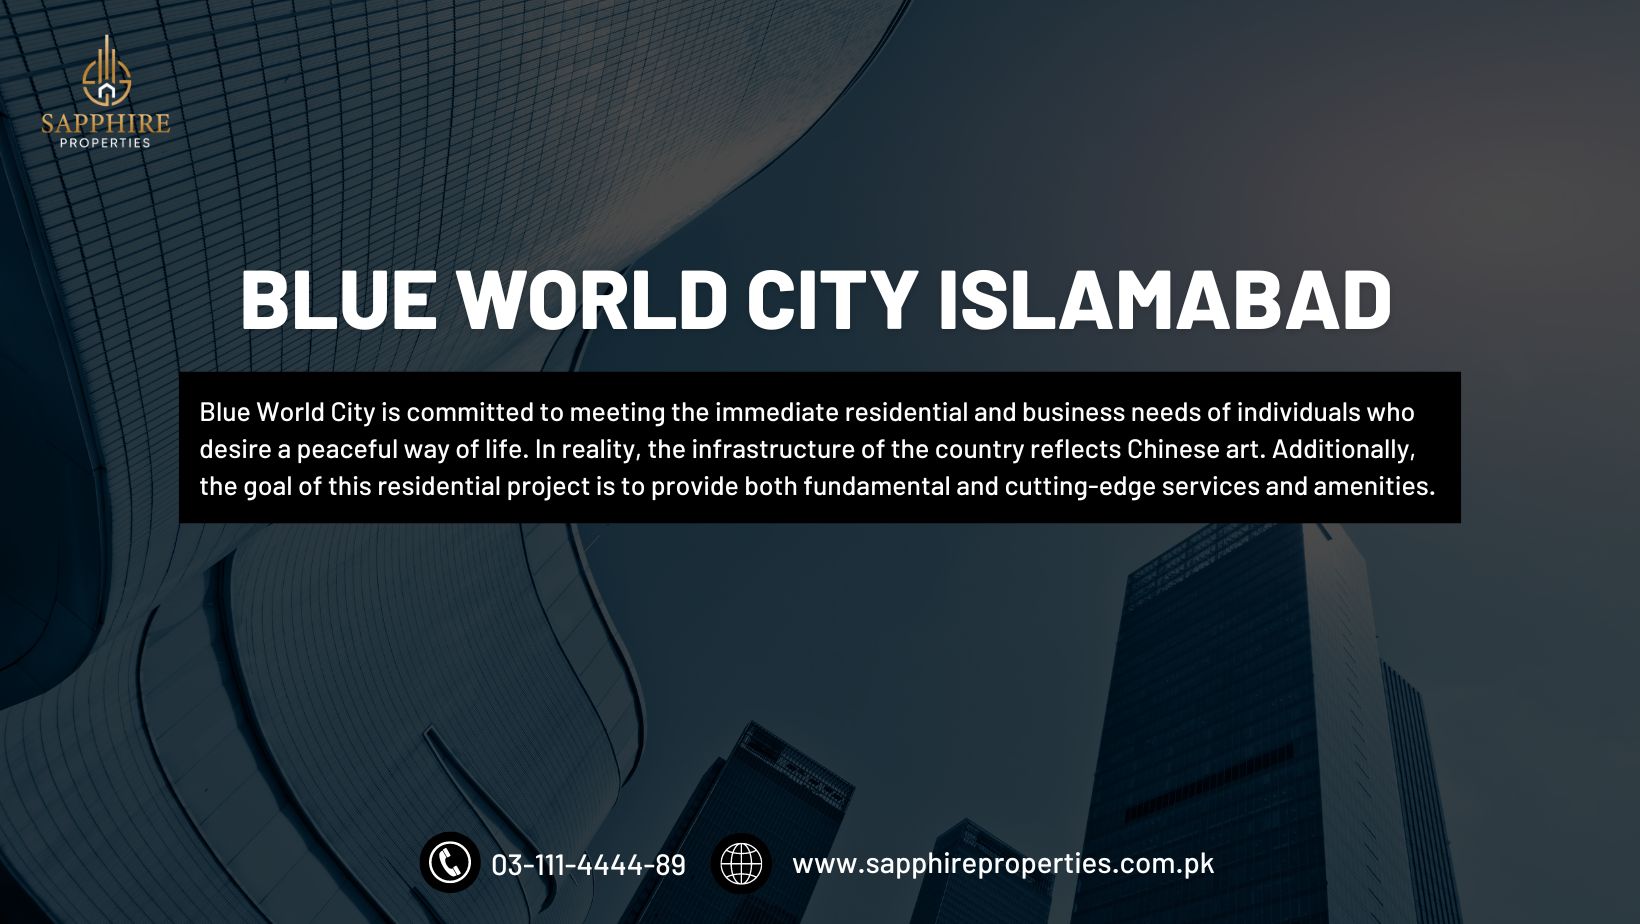 7 Benefits Of Investing In Blue World City Islamabad